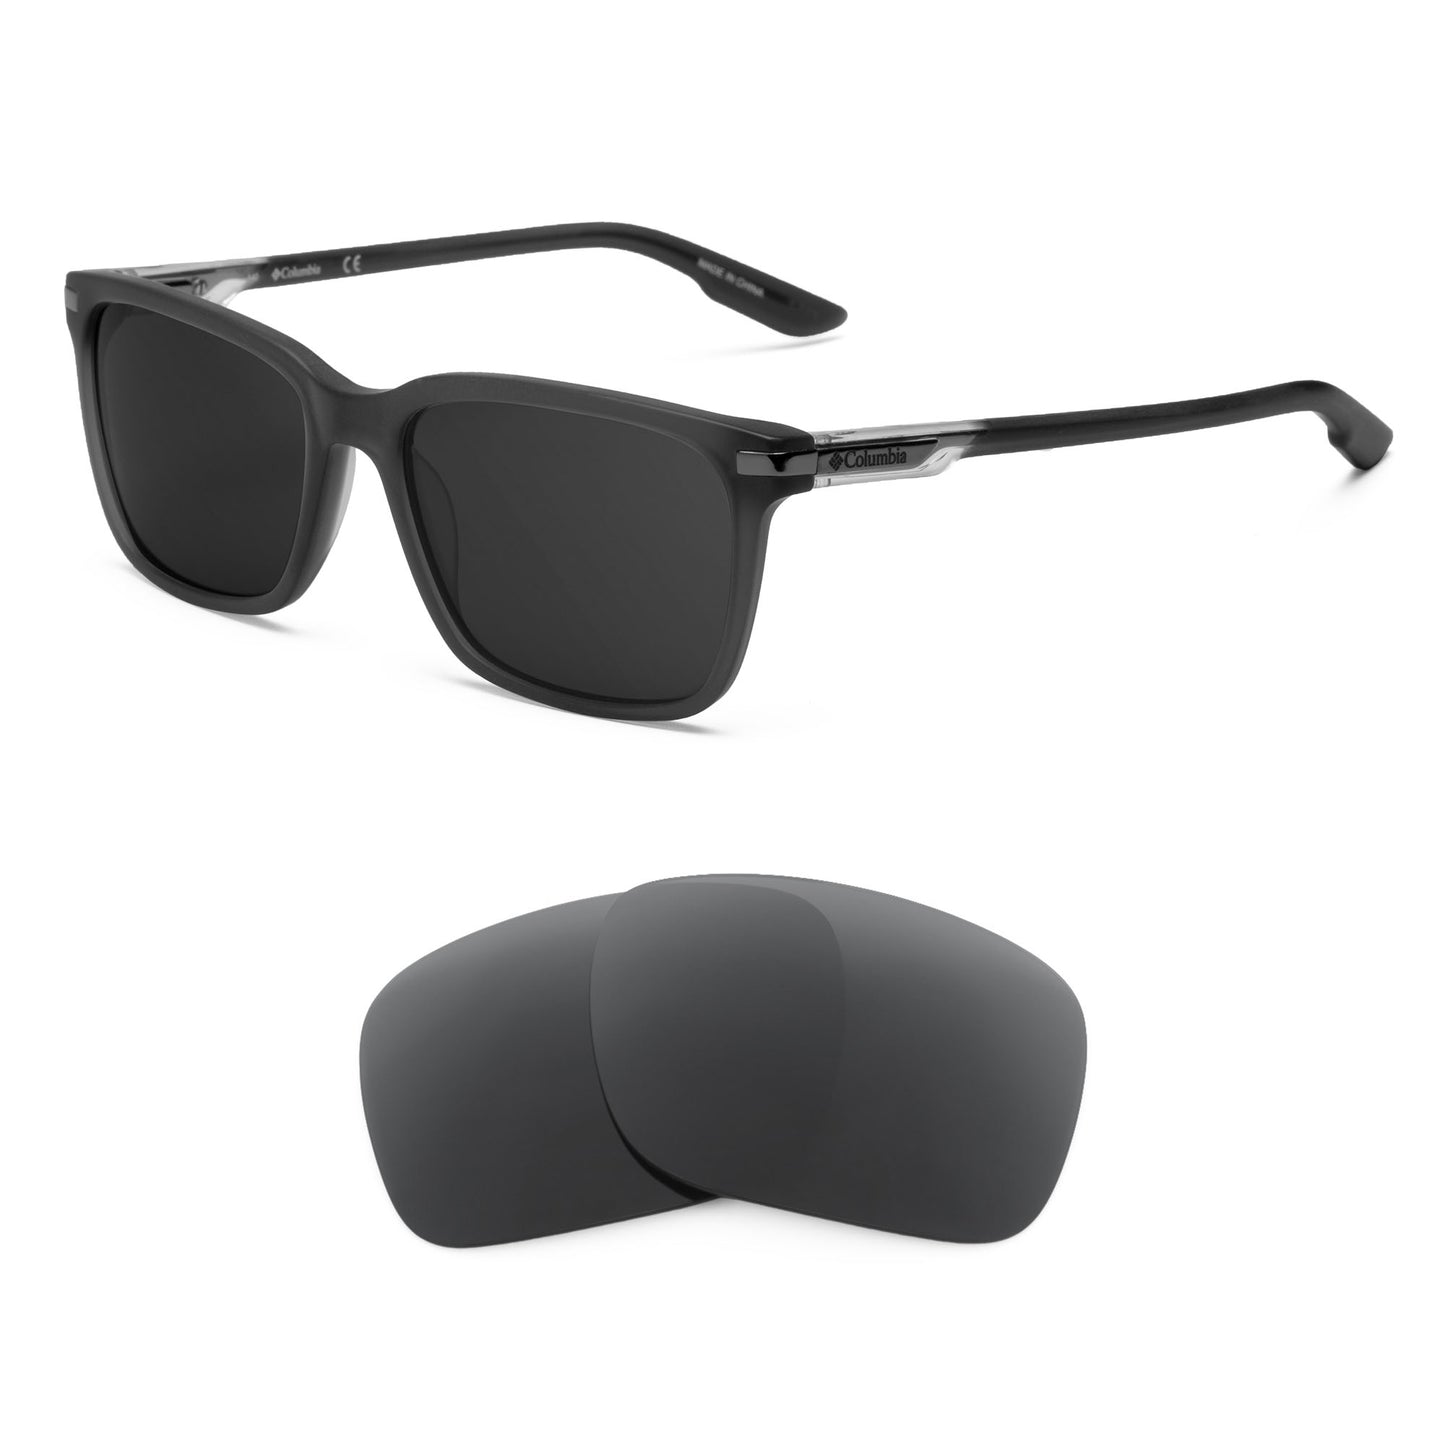 Columbia Peakbagger sunglasses with replacement lenses